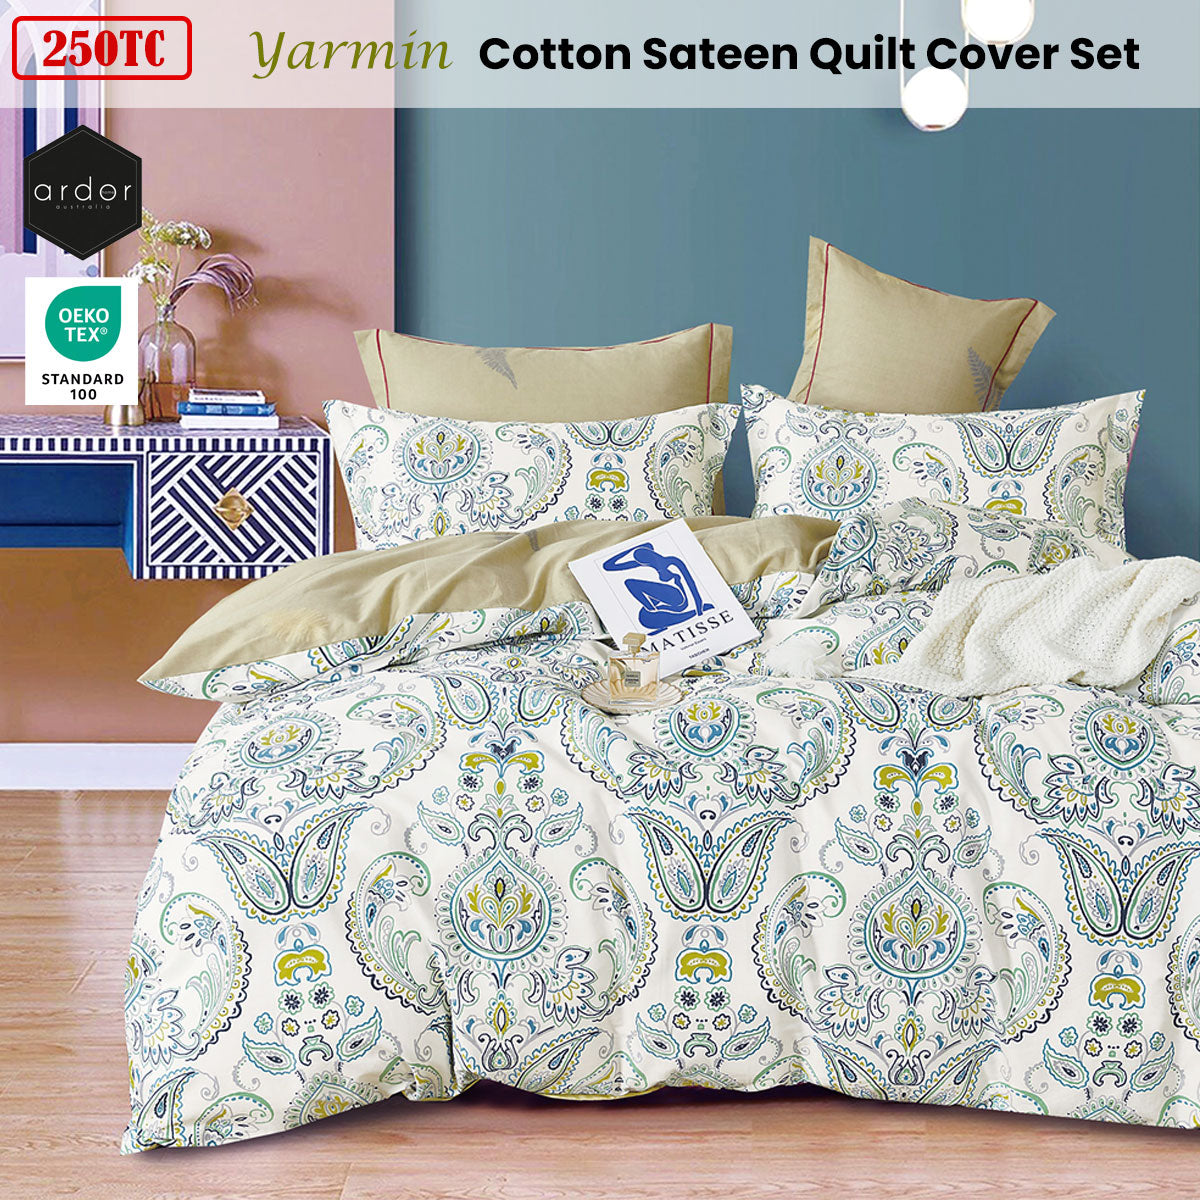 250TC Yarmin Moroccan Cotton Sateen Quilt Cover Set King